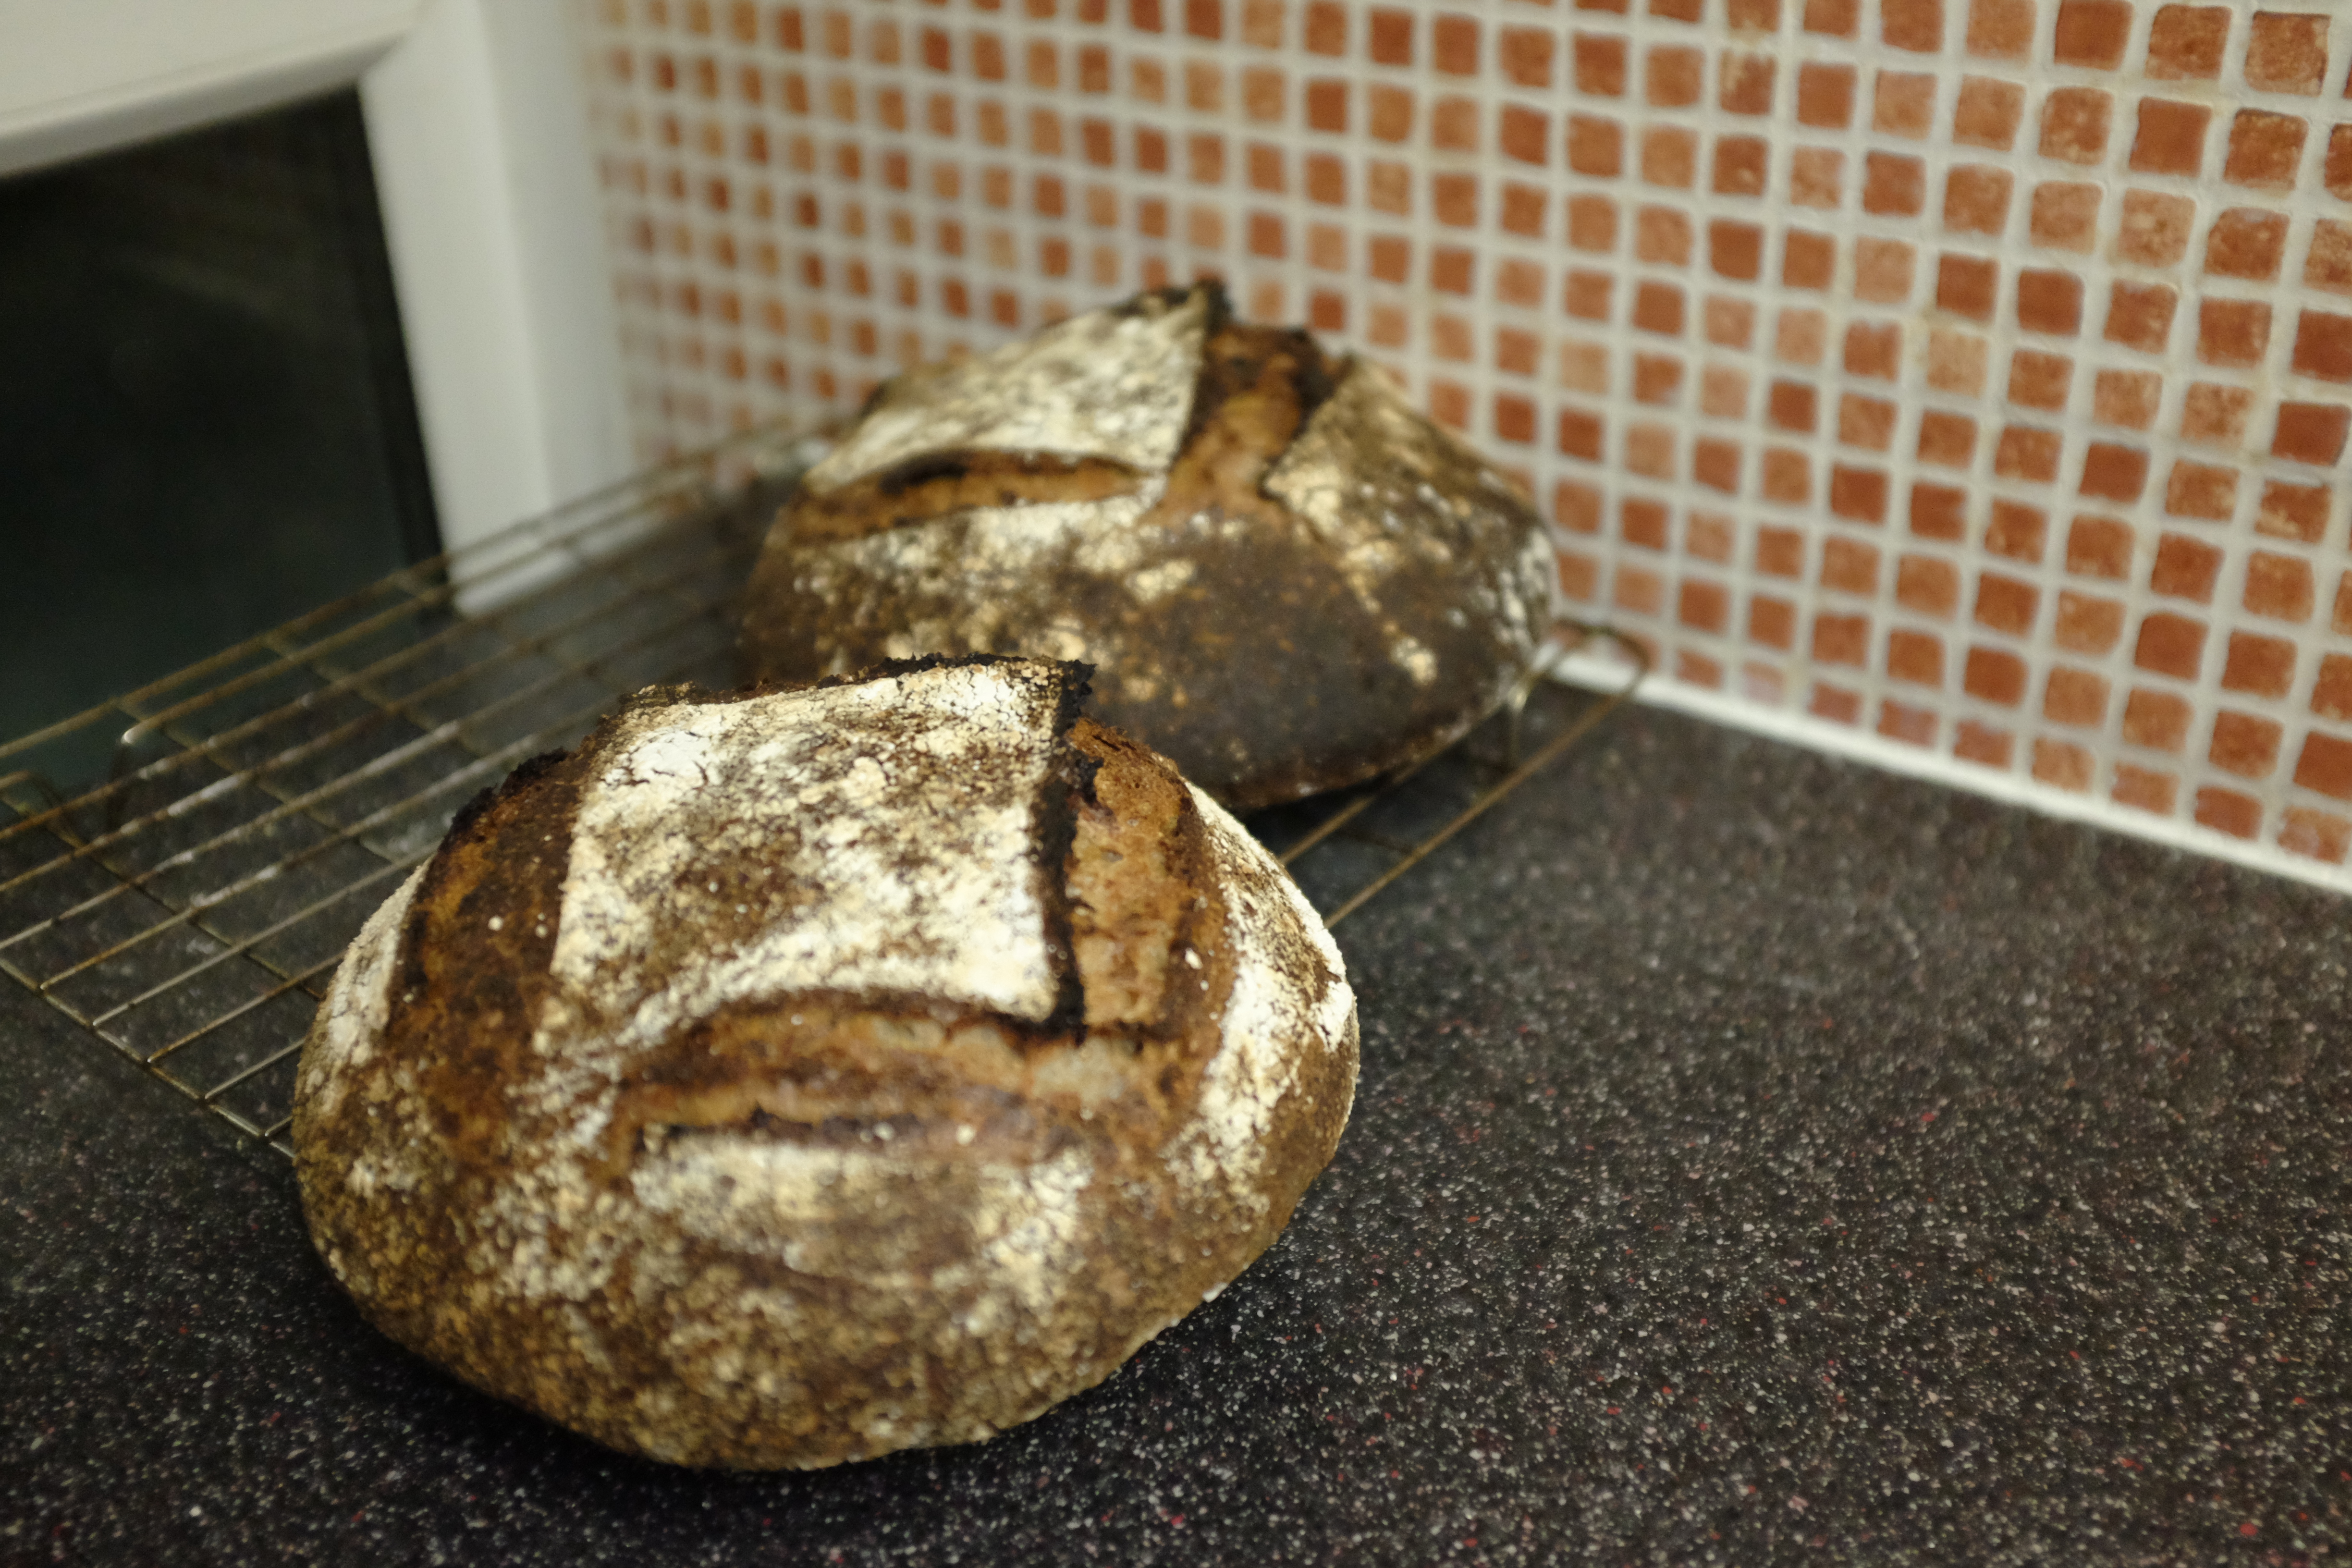 An image of a bread called “Wholemeal Sourdough (Tartine)”